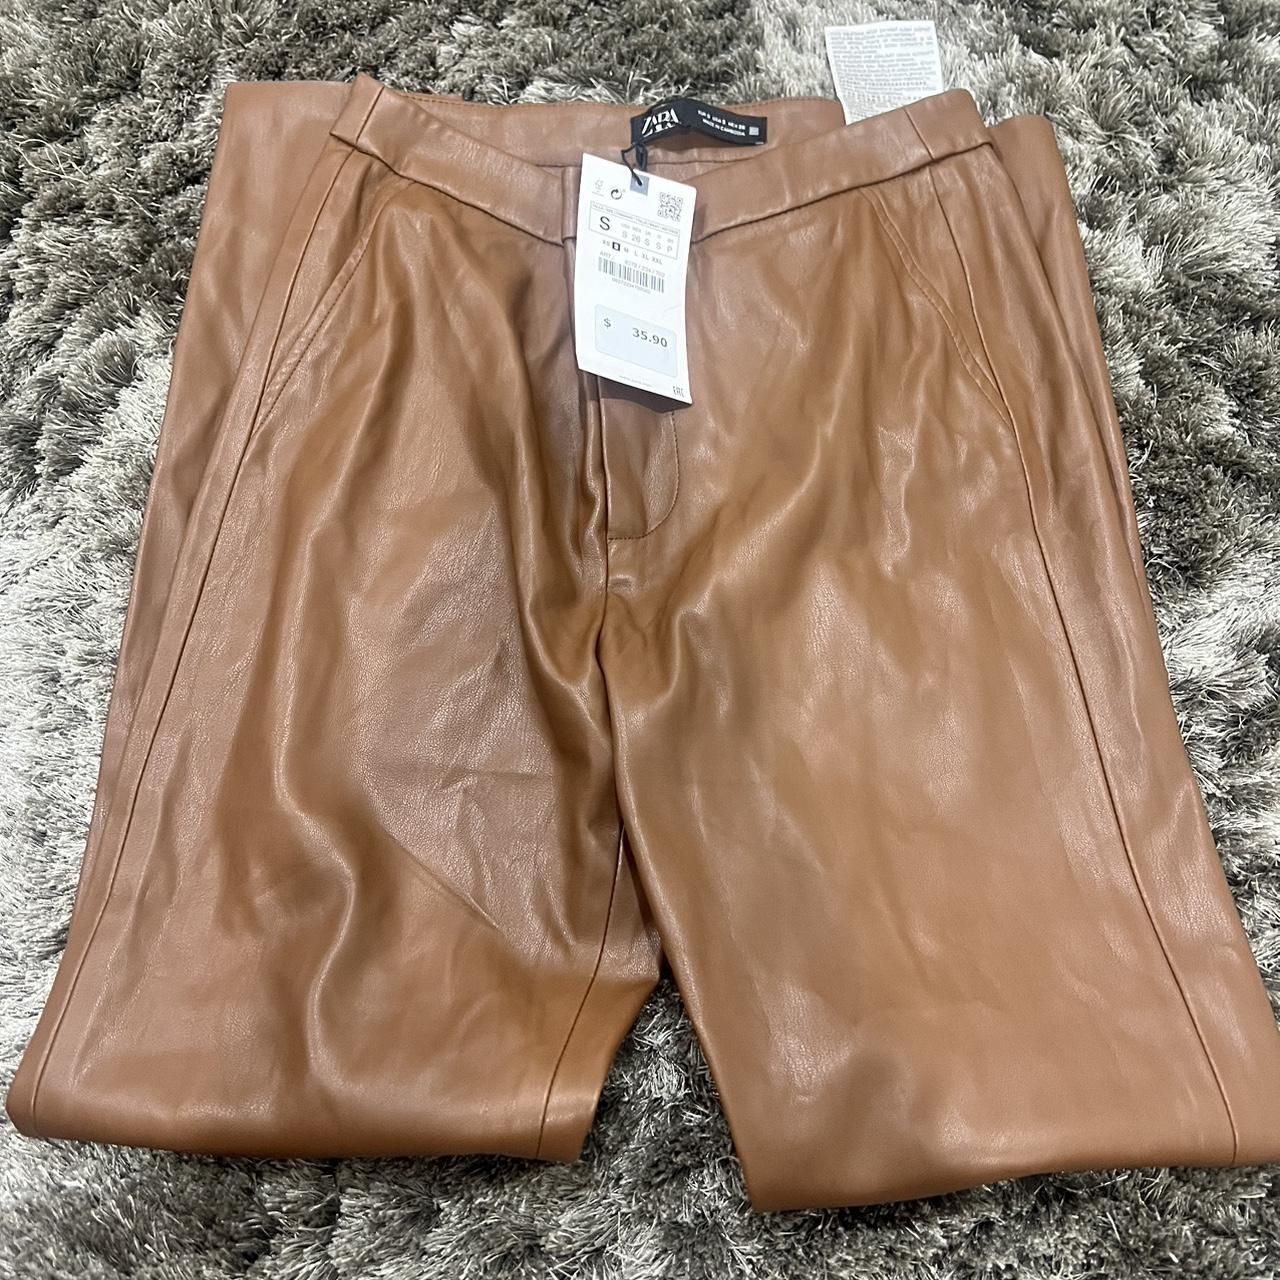 Faux brown leather pants good for work Zara small - Depop